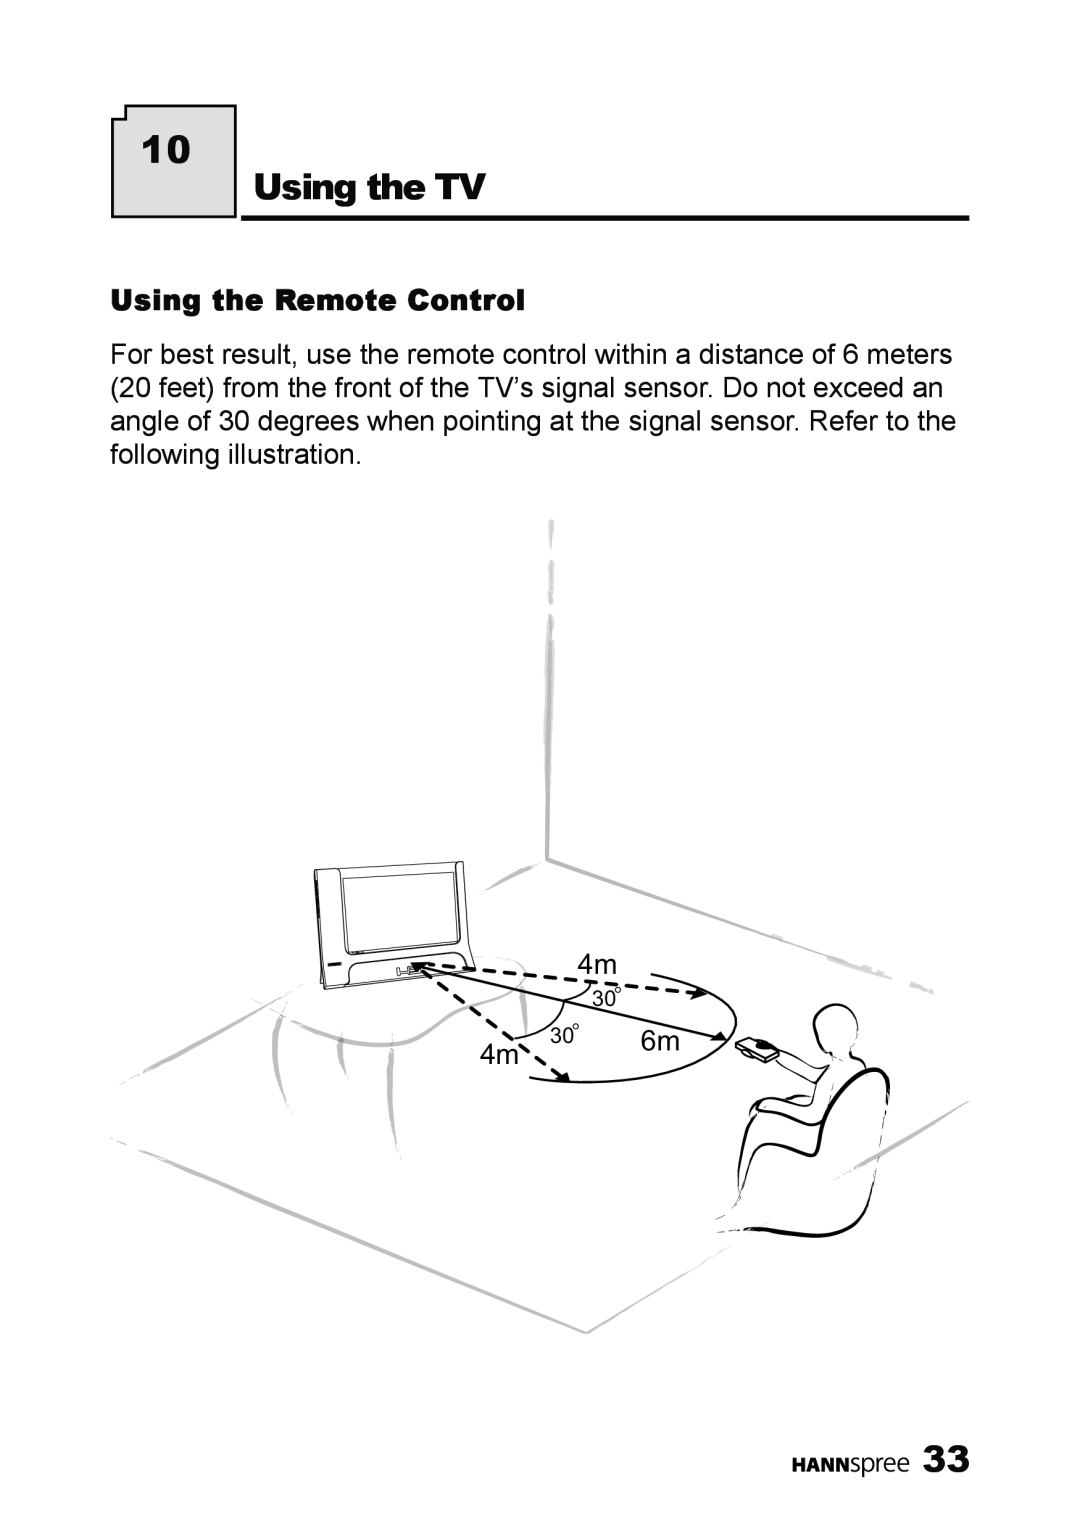 HANNspree LT11-23A1 user manual Using the TV, Using the Remote Control 